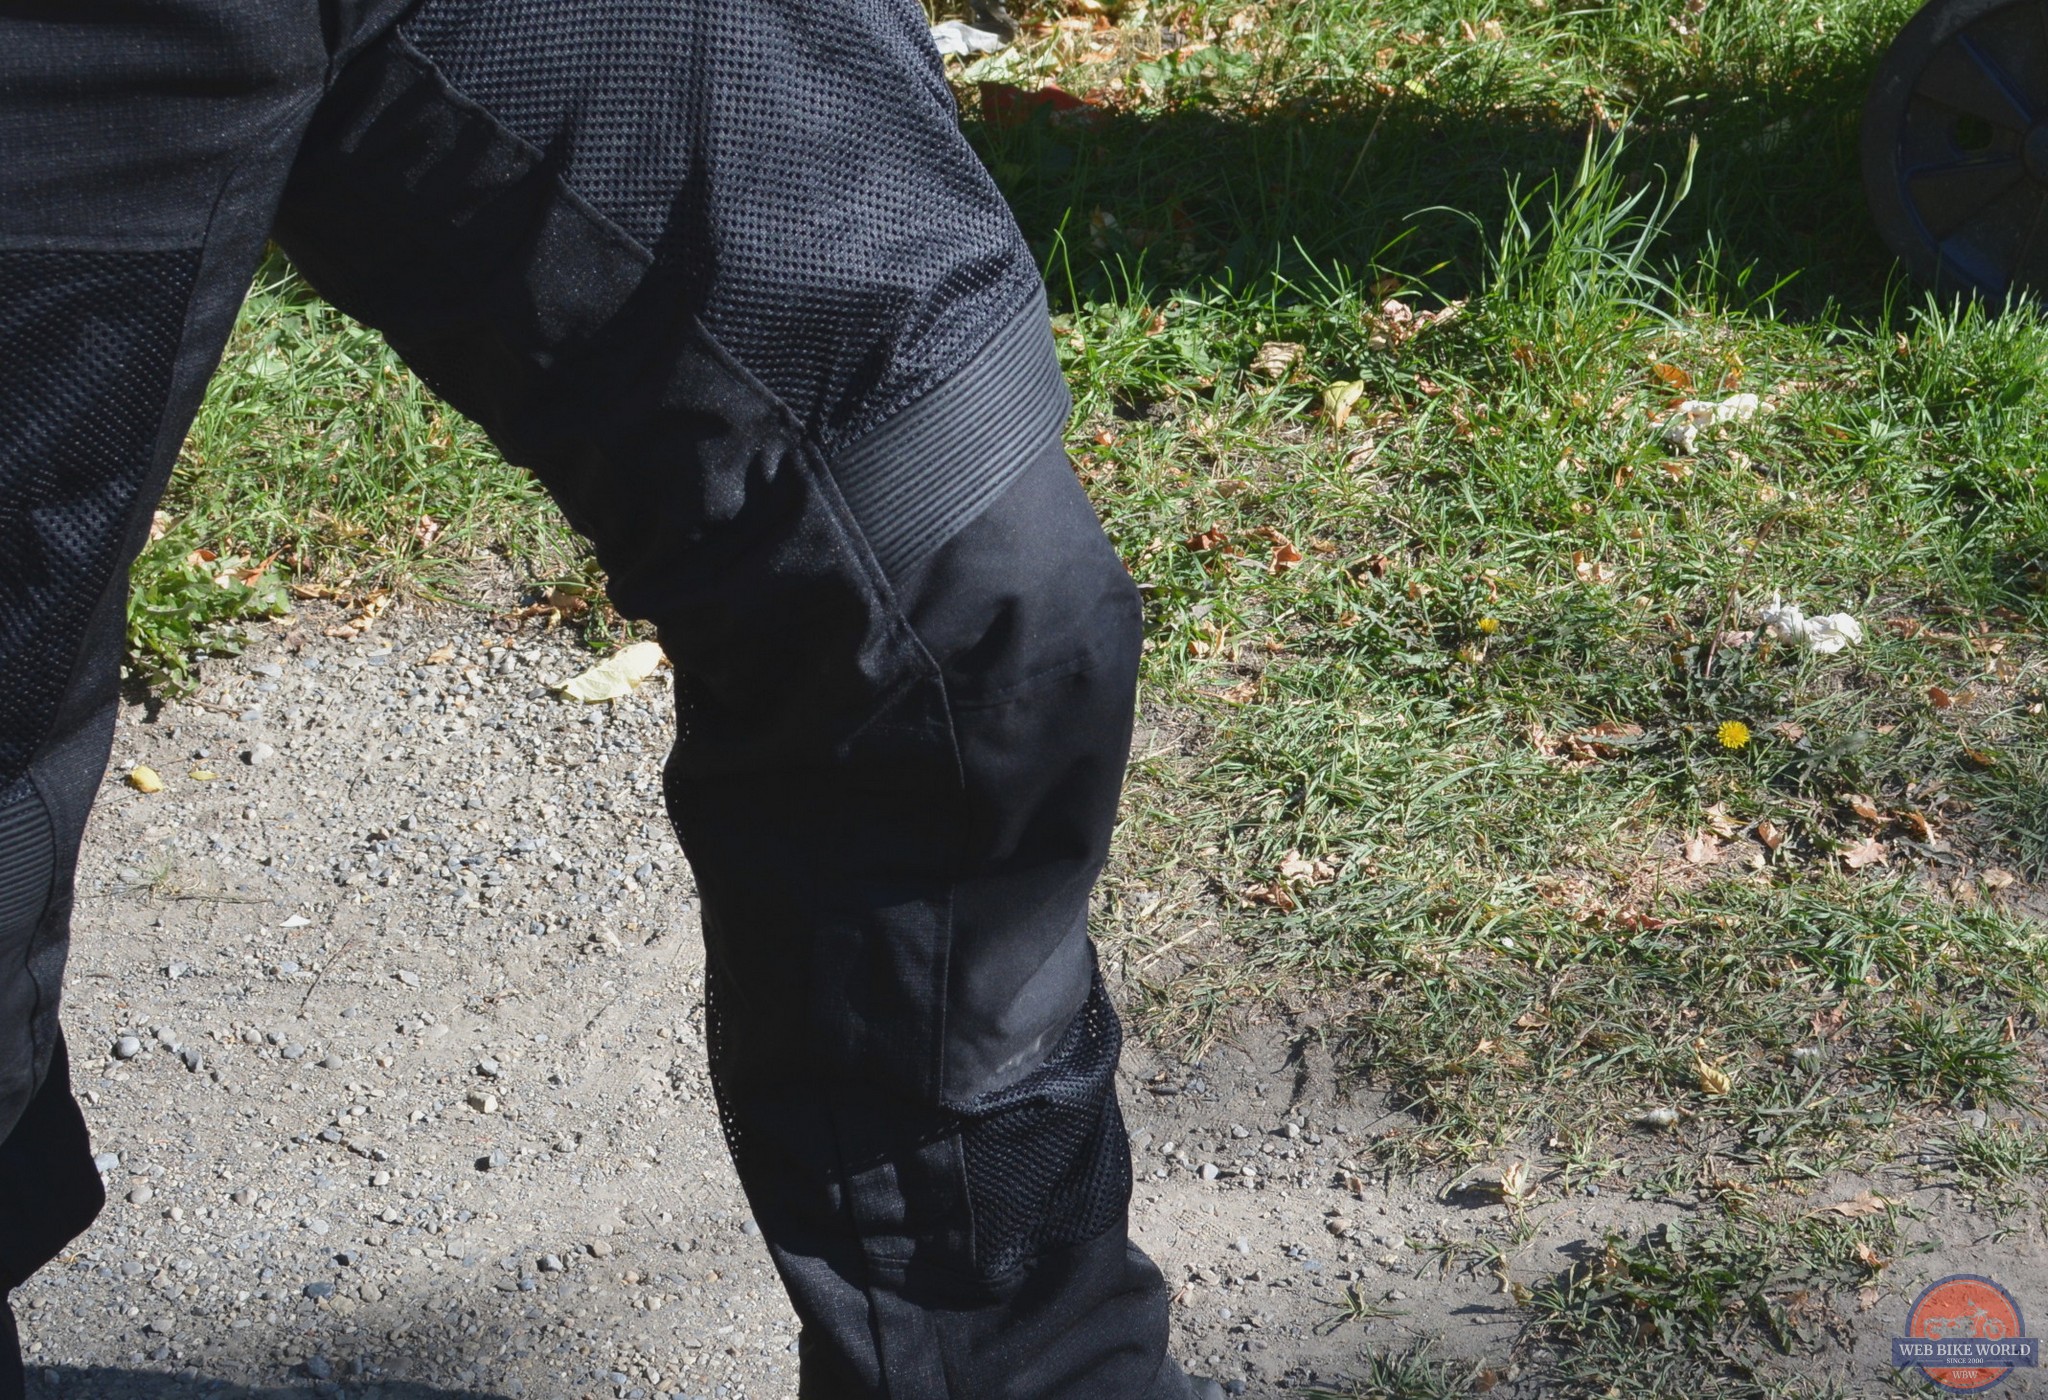 A close-up of the knee of the REV'IT! Tornado 3 Mesh Pants